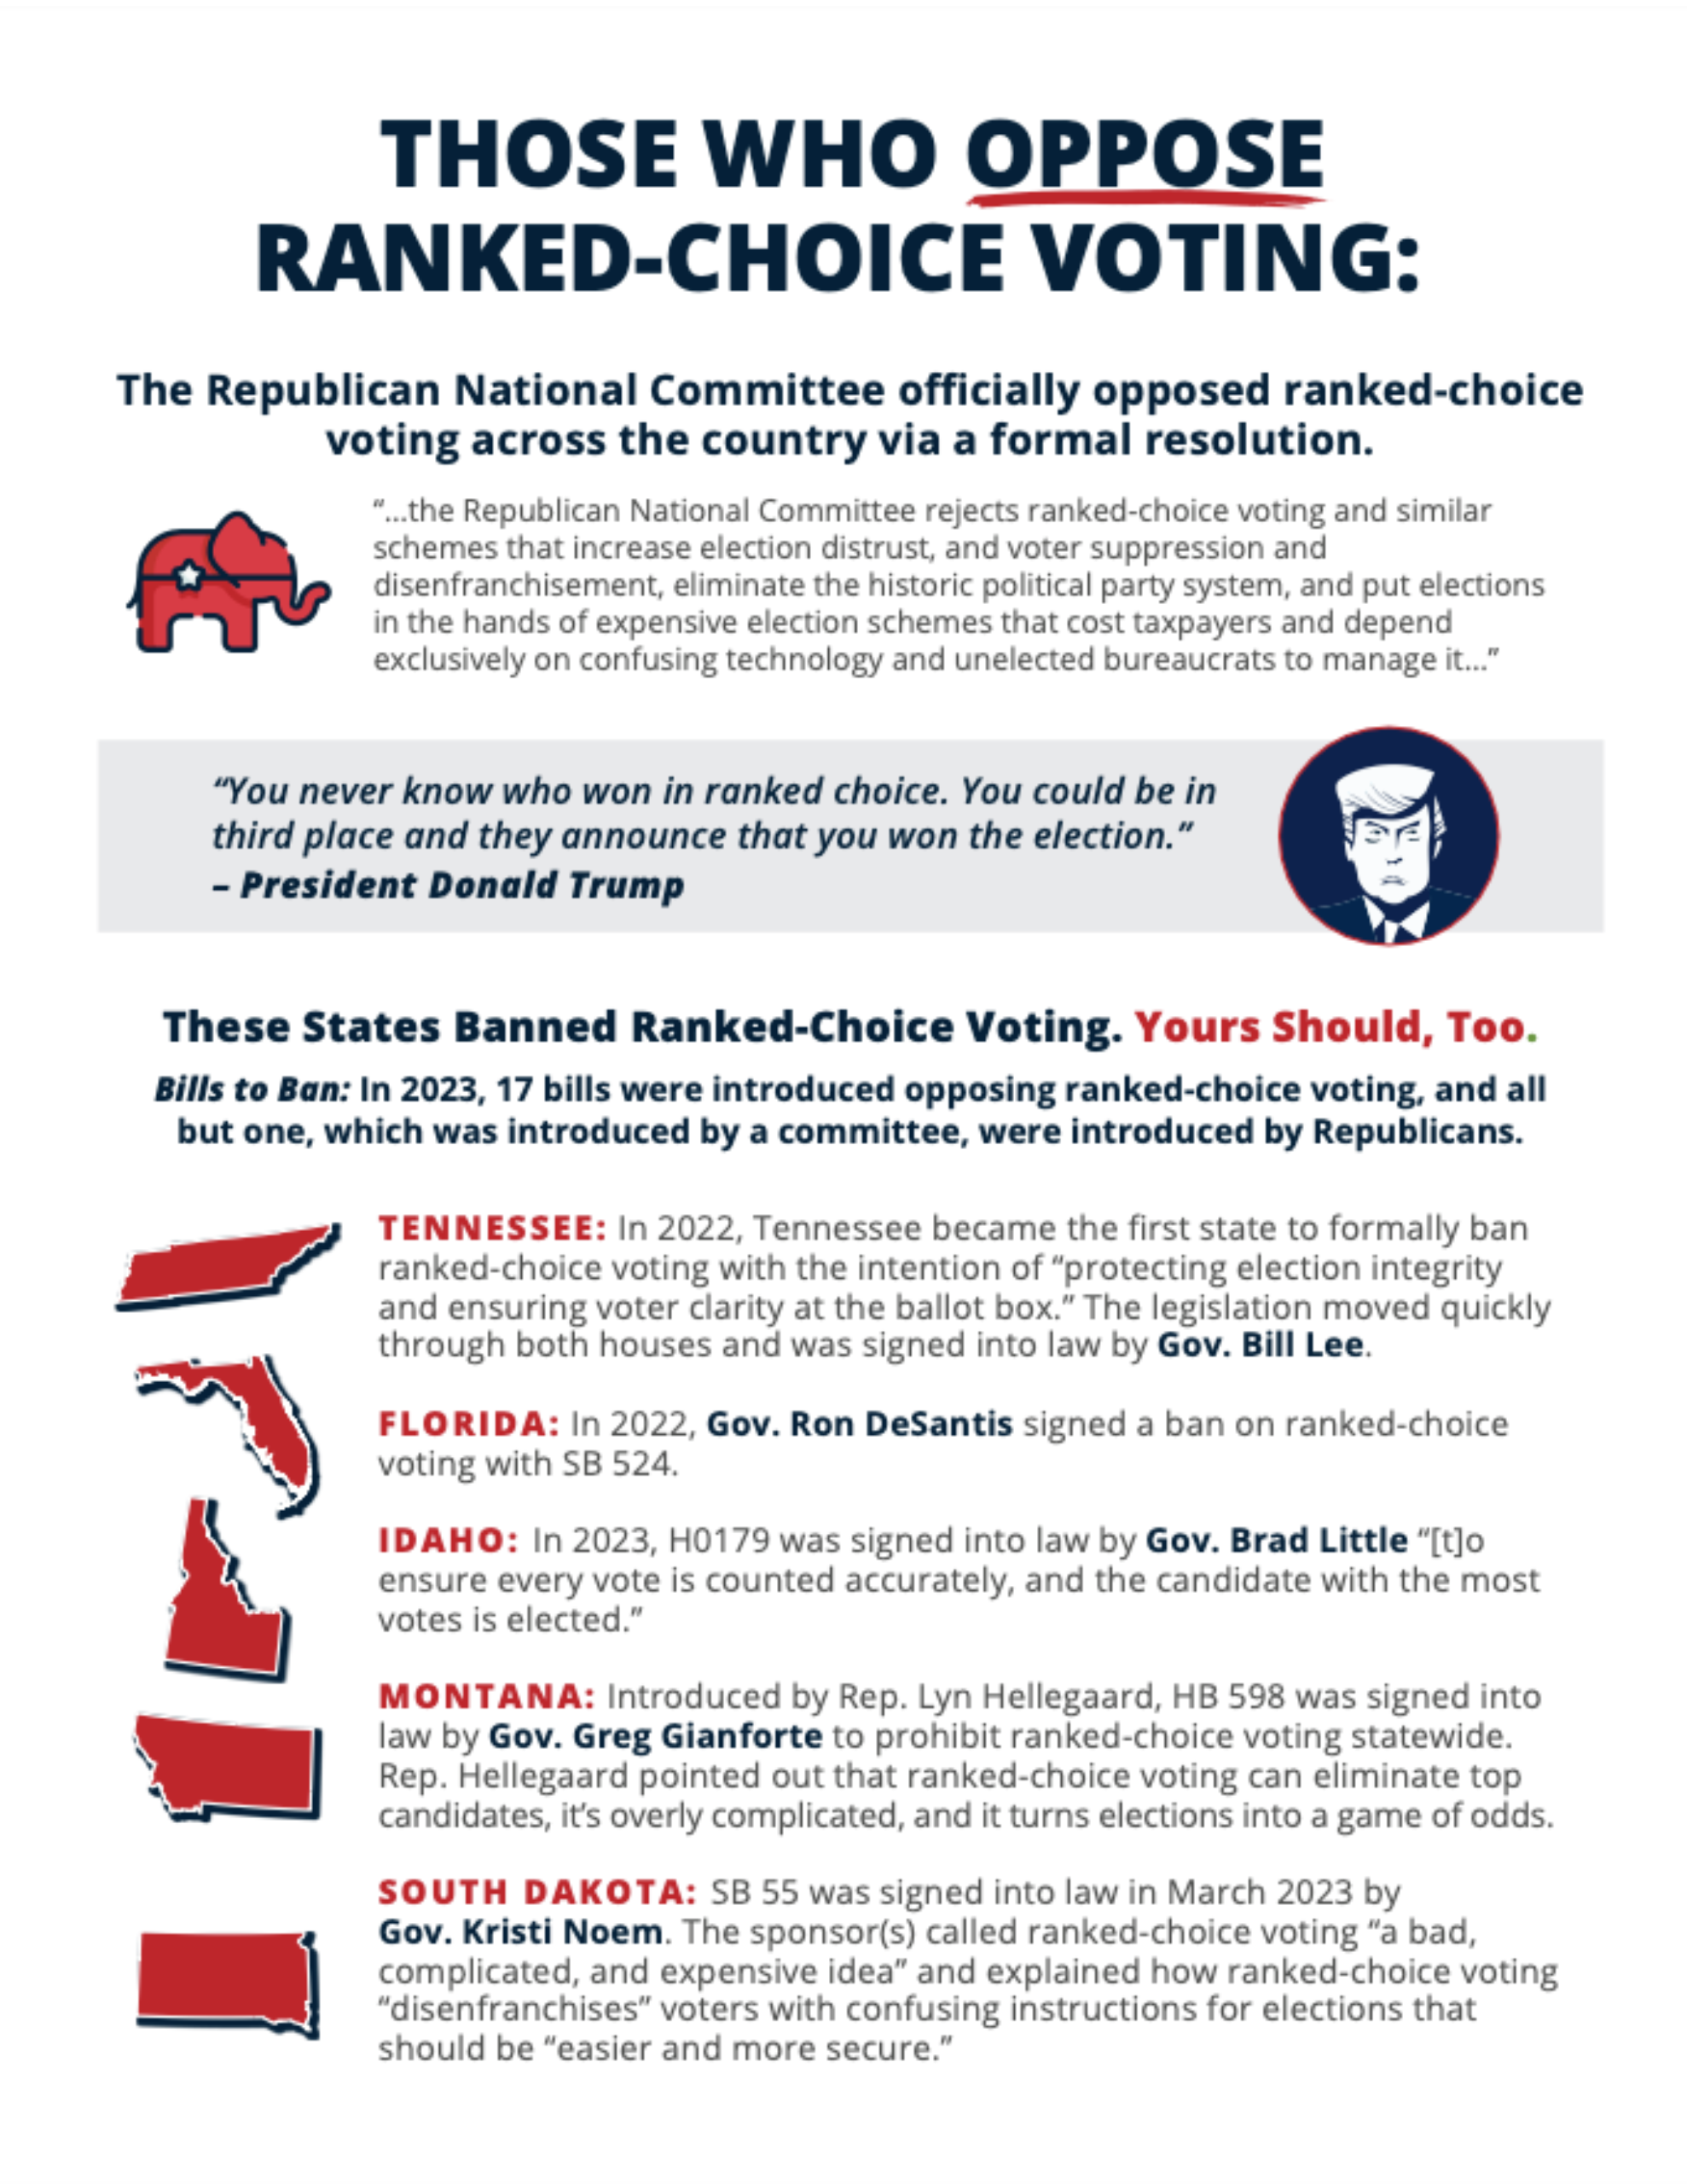 Ranked-Choice Voting: Opposition vs. Support